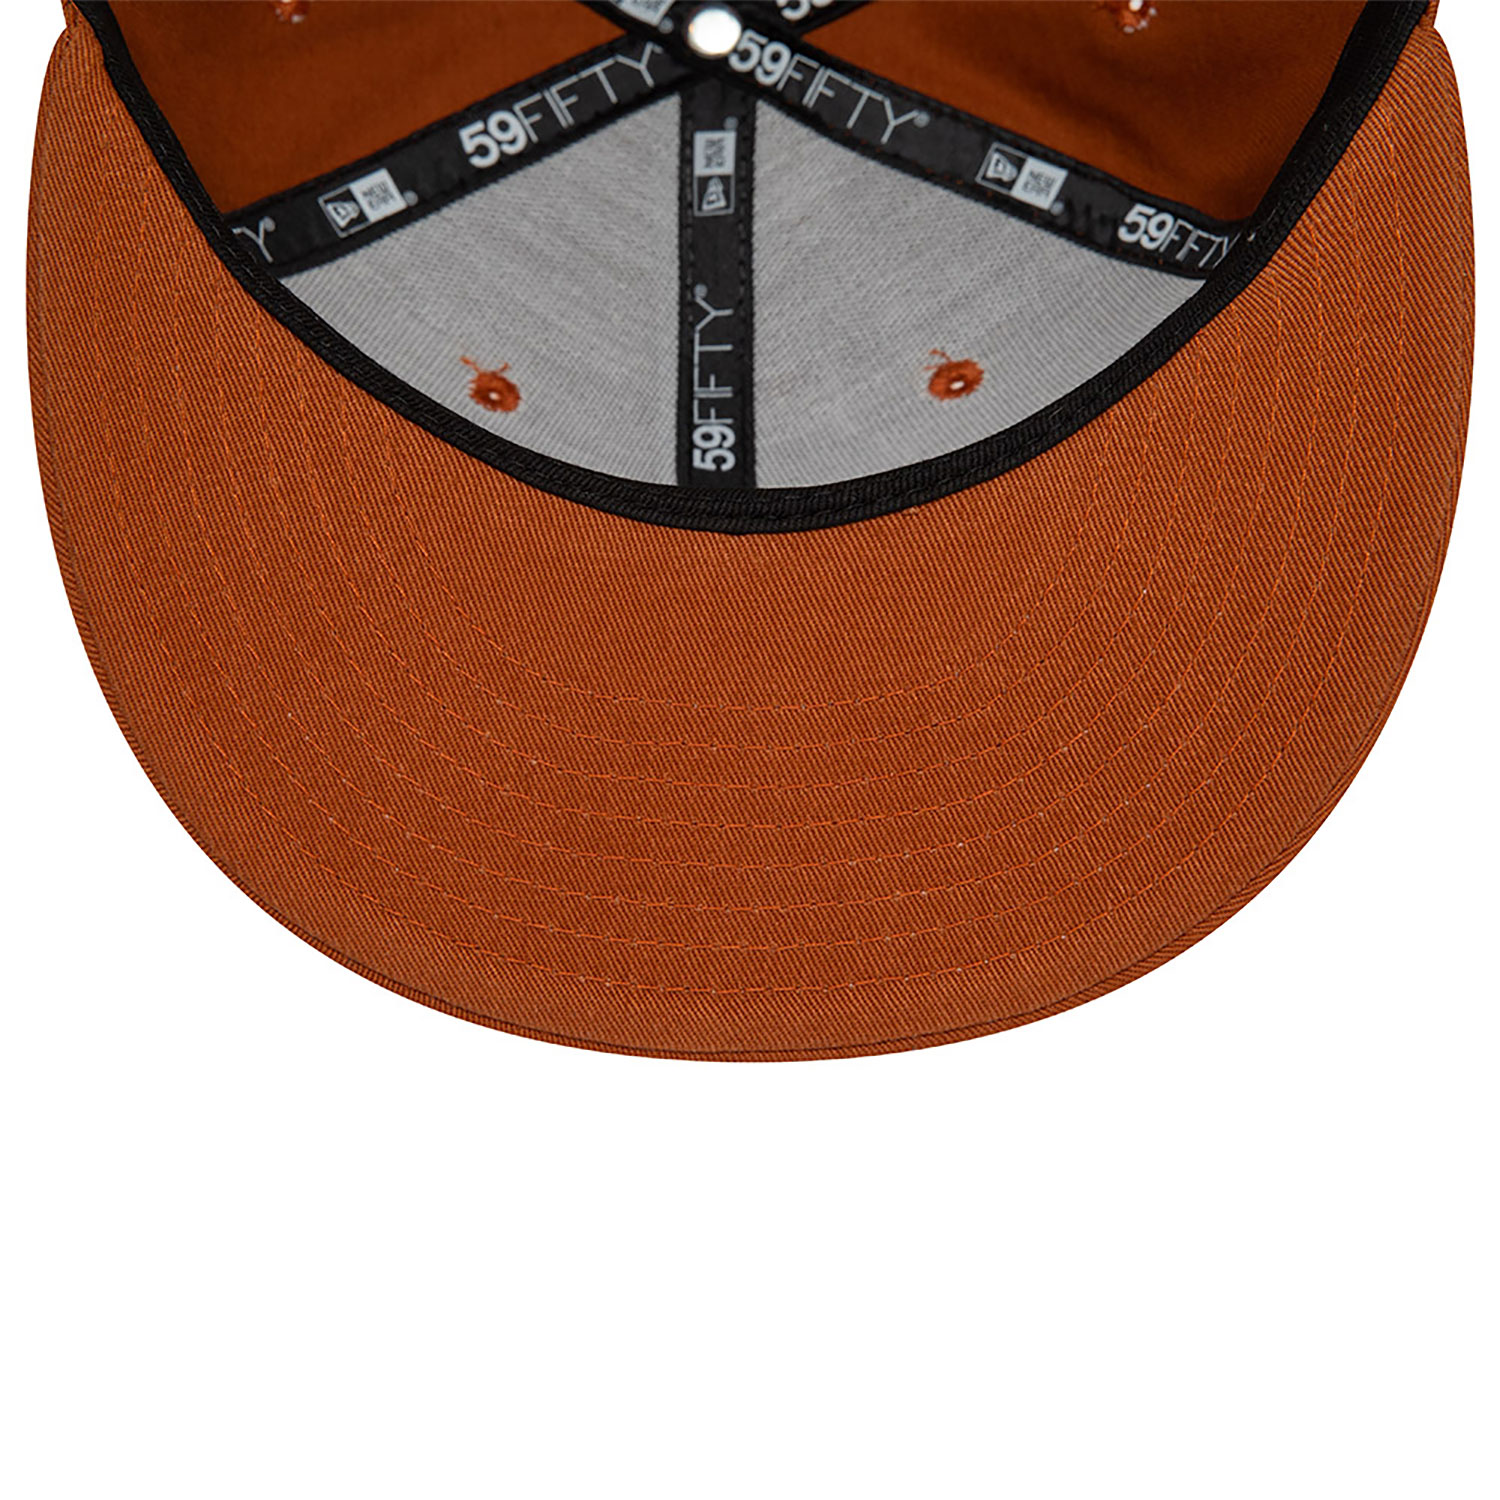 New York Yankees League Essential Brown 59FIFTY Fitted Cap